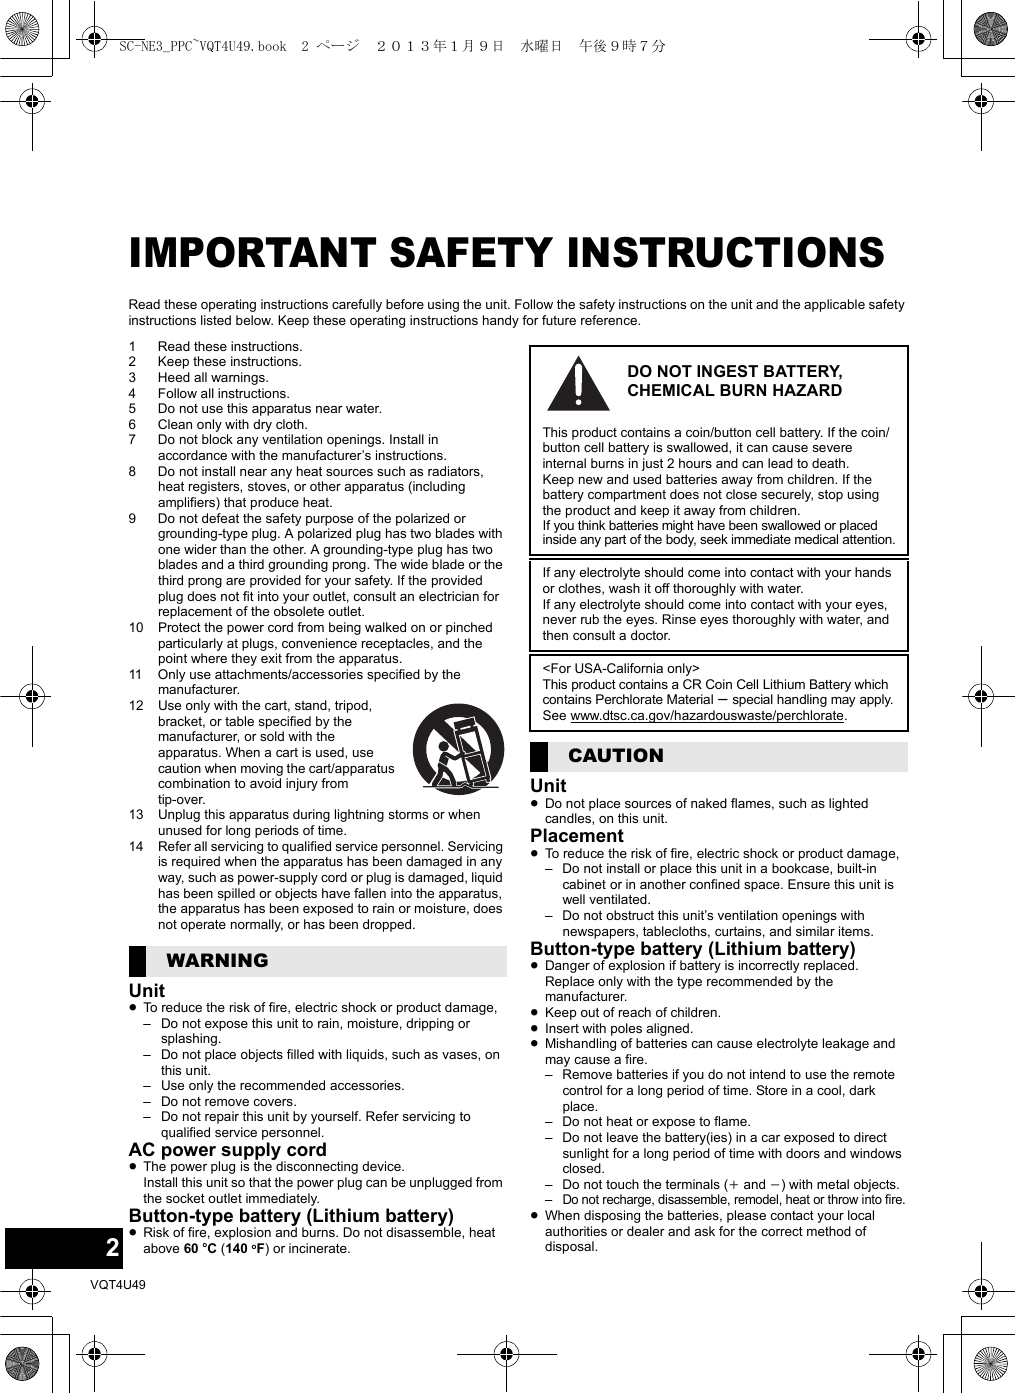 2VQT4U49IMPORTANT SAFETY INSTRUCTIONSRead these operating instructions carefully before using the unit. Follow the safety instructions on the unit and the applicable safety instructions listed below. Keep these operating instructions handy for future reference.1 Read these instructions.2 Keep these instructions.3 Heed all warnings.4 Follow all instructions.5 Do not use this apparatus near water.6 Clean only with dry cloth.7 Do not block any ventilation openings. Install in accordance with the manufacturer’s instructions.8 Do not install near any heat sources such as radiators, heat registers, stoves, or other apparatus (including amplifiers) that produce heat.9 Do not defeat the safety purpose of the polarized or grounding-type plug. A polarized plug has two blades with one wider than the other. A grounding-type plug has two blades and a third grounding prong. The wide blade or the third prong are provided for your safety. If the provided plug does not fit into your outlet, consult an electrician for replacement of the obsolete outlet.10 Protect the power cord from being walked on or pinched particularly at plugs, convenience receptacles, and the point where they exit from the apparatus.11 Only use attachments/accessories specified by the manufacturer.12 Use only with the cart, stand, tripod, bracket, or table specified by the manufacturer, or sold with the apparatus. When a cart is used, use caution when moving the cart/apparatus combination to avoid injury from tip-over.13 Unplug this apparatus during lightning storms or when unused for long periods of time.14 Refer all servicing to qualified service personnel. Servicing is required when the apparatus has been damaged in any way, such as power-supply cord or plug is damaged, liquid has been spilled or objects have fallen into the apparatus, the apparatus has been exposed to rain or moisture, does not operate normally, or has been dropped.Unit≥To reduce the risk of fire, electric shock or product damage,– Do not expose this unit to rain, moisture, dripping or splashing.– Do not place objects filled with liquids, such as vases, on this unit.– Use only the recommended accessories.– Do not remove covers.– Do not repair this unit by yourself. Refer servicing to qualified service personnel.AC power supply cord≥The power plug is the disconnecting device. Install this unit so that the power plug can be unplugged from the socket outlet immediately.Button-type battery (Lithium battery)≥Risk of fire, explosion and burns. Do not disassemble, heat above 60 oC (140 oF) or incinerate.Unit≥Do not place sources of naked flames, such as lighted candles, on this unit.Placement≥To reduce the risk of fire, electric shock or product damage,– Do not install or place this unit in a bookcase, built-in cabinet or in another confined space. Ensure this unit is well ventilated.– Do not obstruct this unit’s ventilation openings with newspapers, tablecloths, curtains, and similar items.Button-type battery (Lithium battery)≥Danger of explosion if battery is incorrectly replaced. Replace only with the type recommended by the manufacturer.≥Keep out of reach of children.≥Insert with poles aligned.≥Mishandling of batteries can cause electrolyte leakage and may cause a fire.– Remove batteries if you do not intend to use the remote control for a long period of time. Store in a cool, dark place.– Do not heat or expose to flame.– Do not leave the battery(ies) in a car exposed to direct sunlight for a long period of time with doors and windows closed.– Do not touch the terminals (i and j) with metal objects.– Do not recharge, disassemble, remodel, heat or throw into fire.≥When disposing the batteries, please contact your local authorities or dealer and ask for the correct method of disposal.WARNINGDO NOT INGEST BATTERY, CHEMICAL BURN HAZARDThis product contains a coin/button cell battery. If the coin/button cell battery is swallowed, it can cause severe internal burns in just 2 hours and can lead to death.Keep new and used batteries away from children. If the battery compartment does not close securely, stop using the product and keep it away from children.If you think batteries might have been swallowed or placed inside any part of the body, seek immediate medical attention.If any electrolyte should come into contact with your hands or clothes, wash it off thoroughly with water.If any electrolyte should come into contact with your eyes, never rub the eyes. Rinse eyes thoroughly with water, and then consult a doctor.&lt;For USA-California only&gt;This product contains a CR Coin Cell Lithium Battery which contains Perchlorate Material s special handling may apply.See www.dtsc.ca.gov/hazardouswaste/perchlorate.CAUTIONSC-NE3_PPC~VQT4U49.book  2 ページ  ２０１３年１月９日　水曜日　午後９時７分